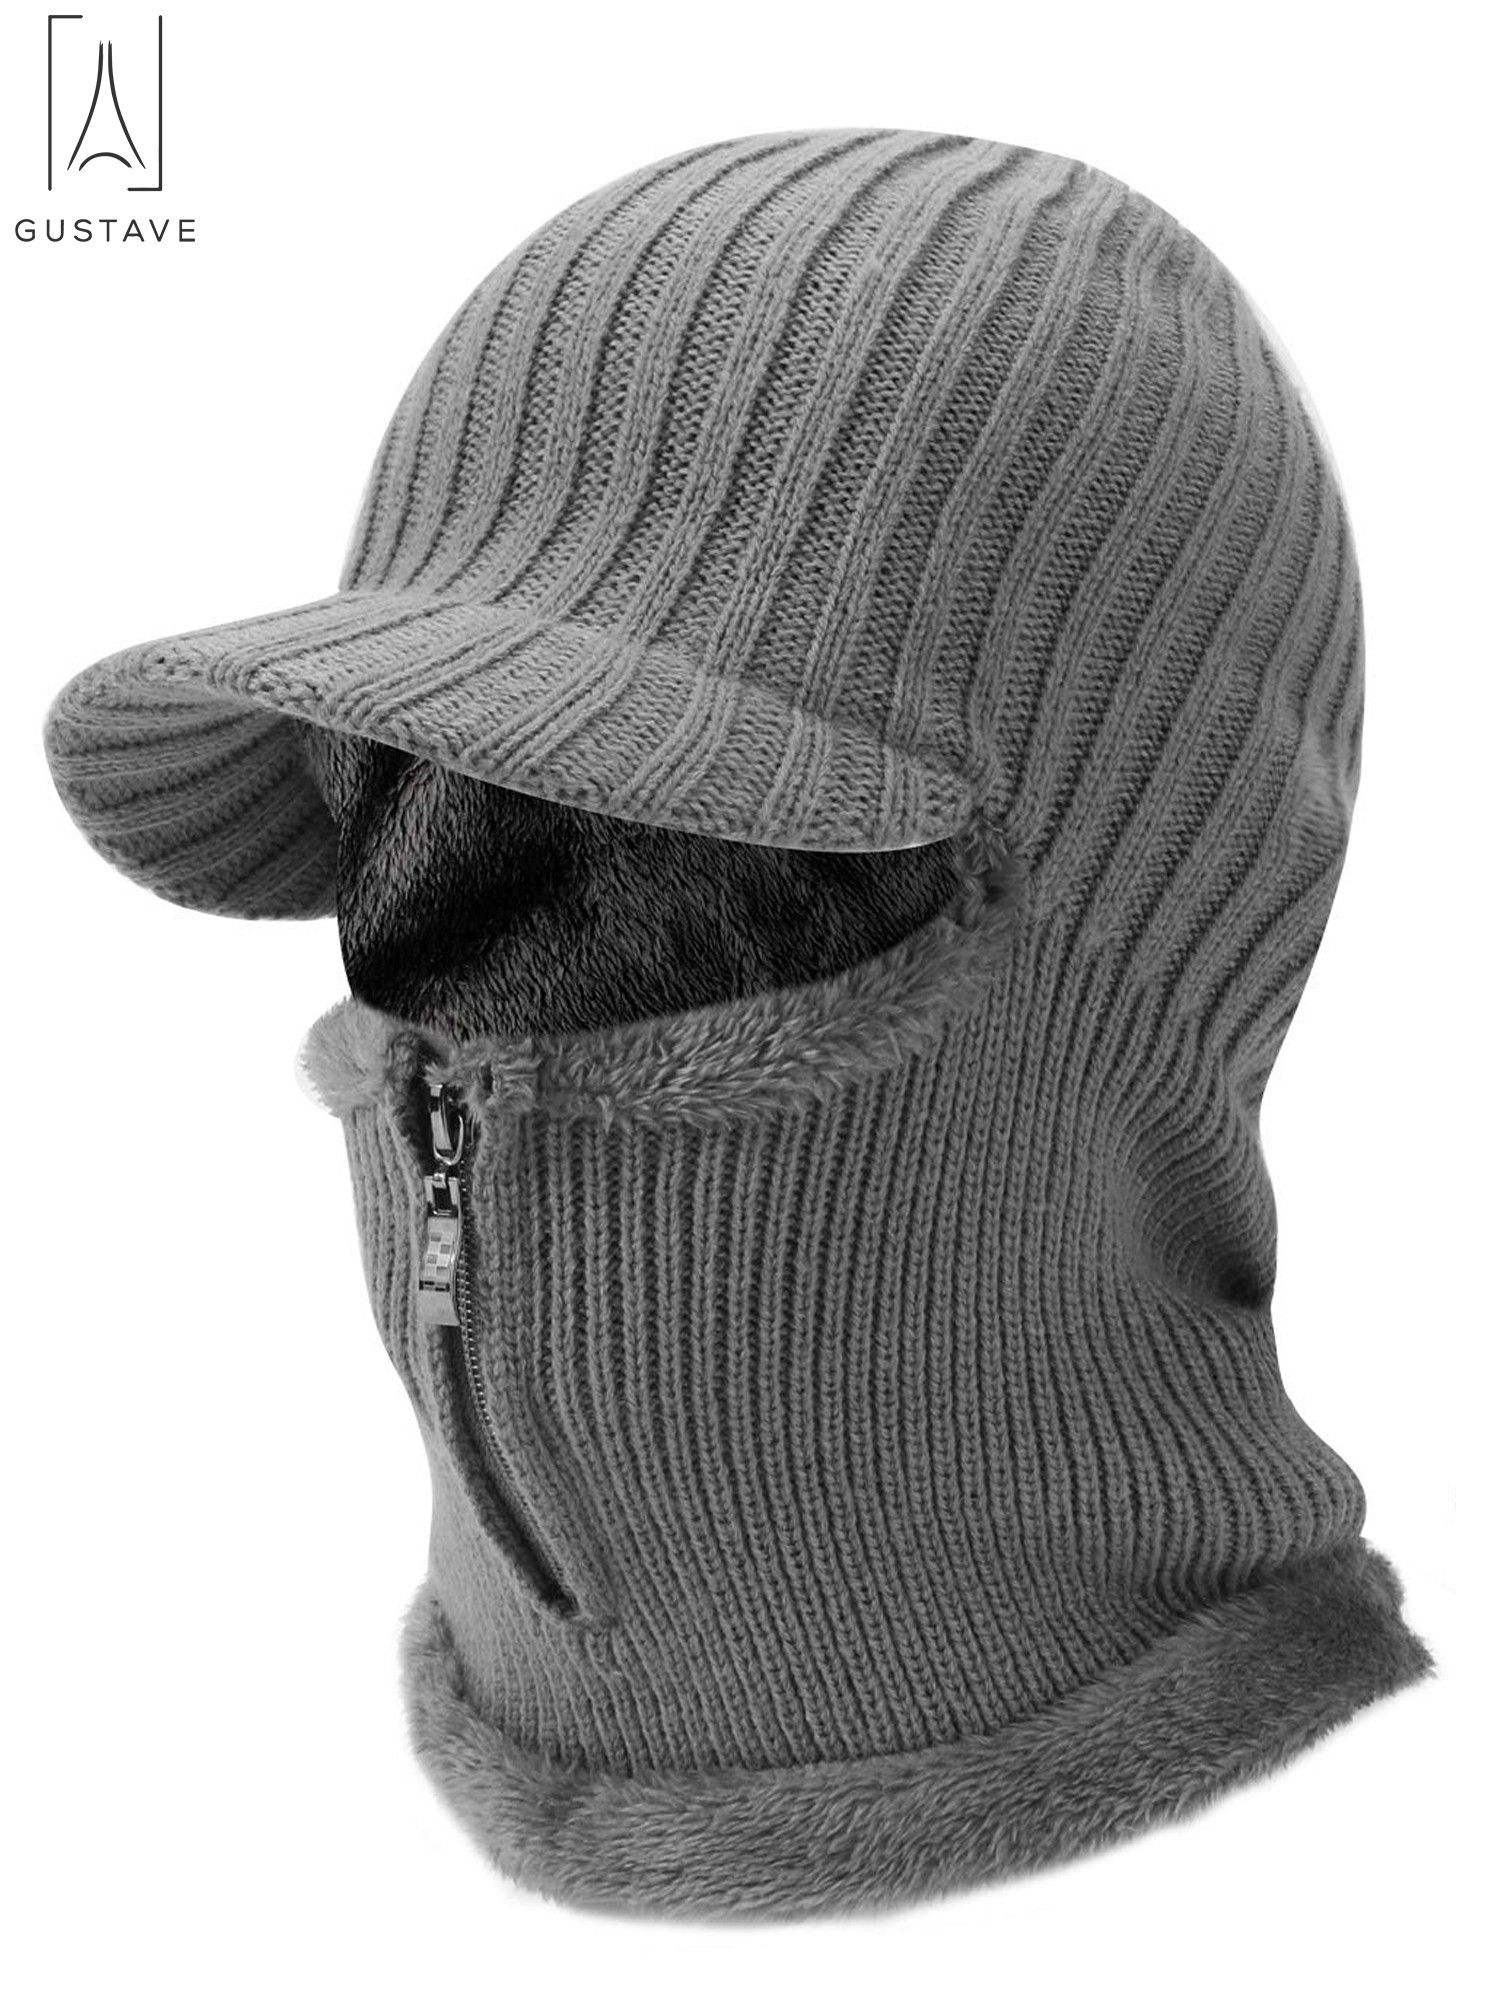 Gustave 2 In 1 Men Winter Warm Balaclava Beanie Hat with Fleece Lining Zipper Neck Scarf Warmer Ear Protector Knitting Stripes Hat and Scarf Conjoined Set "Gray" - image 2 of 9